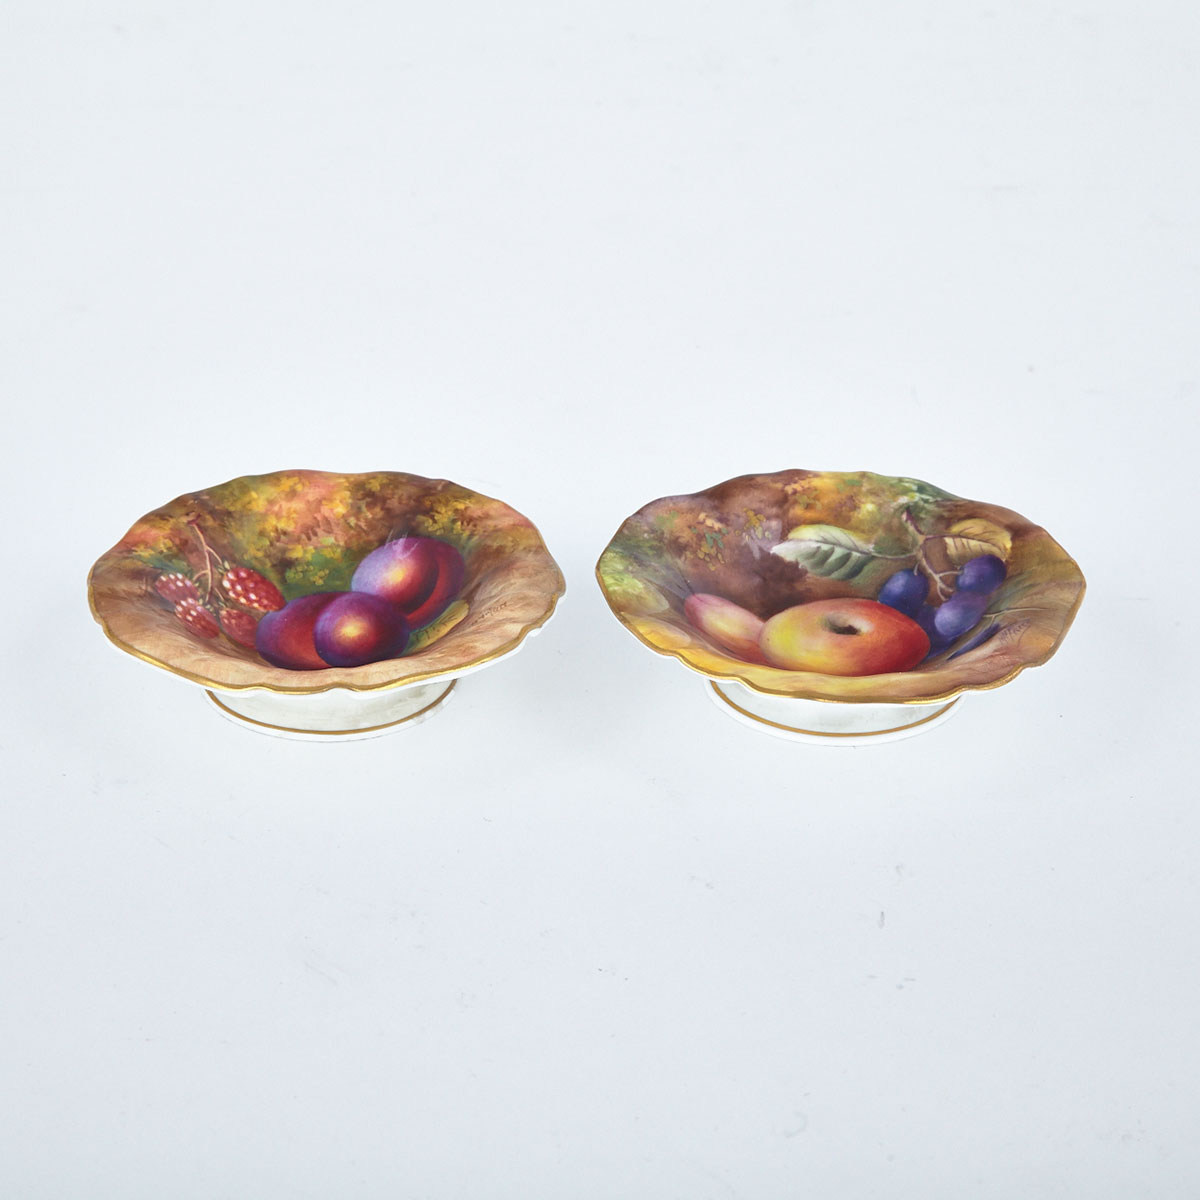 Pair of Royal Worcester Small Footed Dishes, Harry Ayrton and Horace Price, c.1941